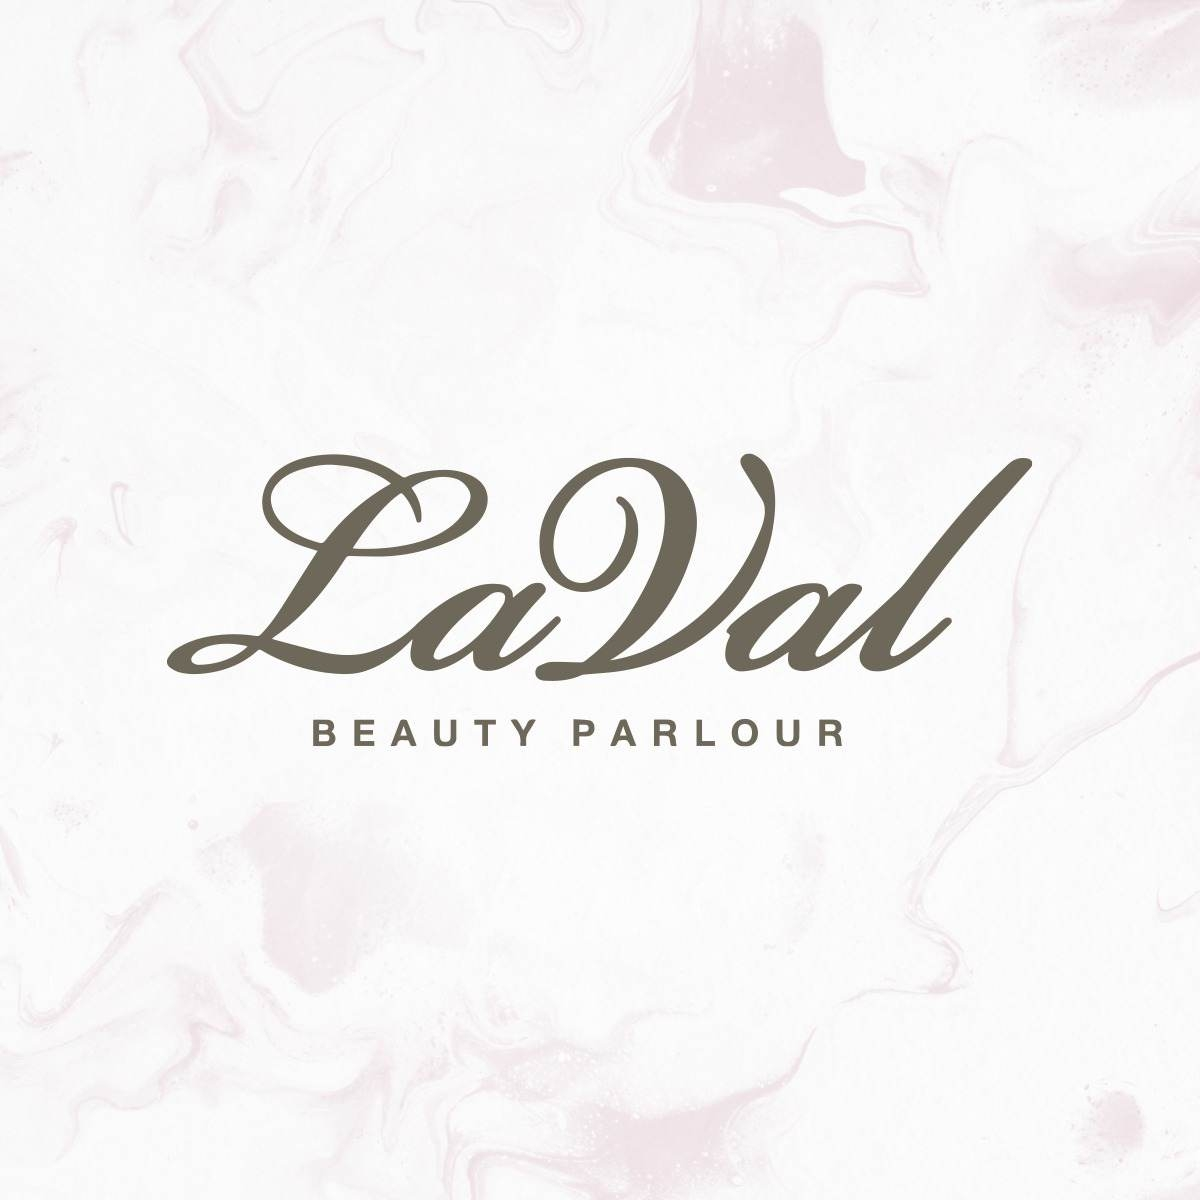 Laval beauty parlor one of the best beauty centers in Alexandria